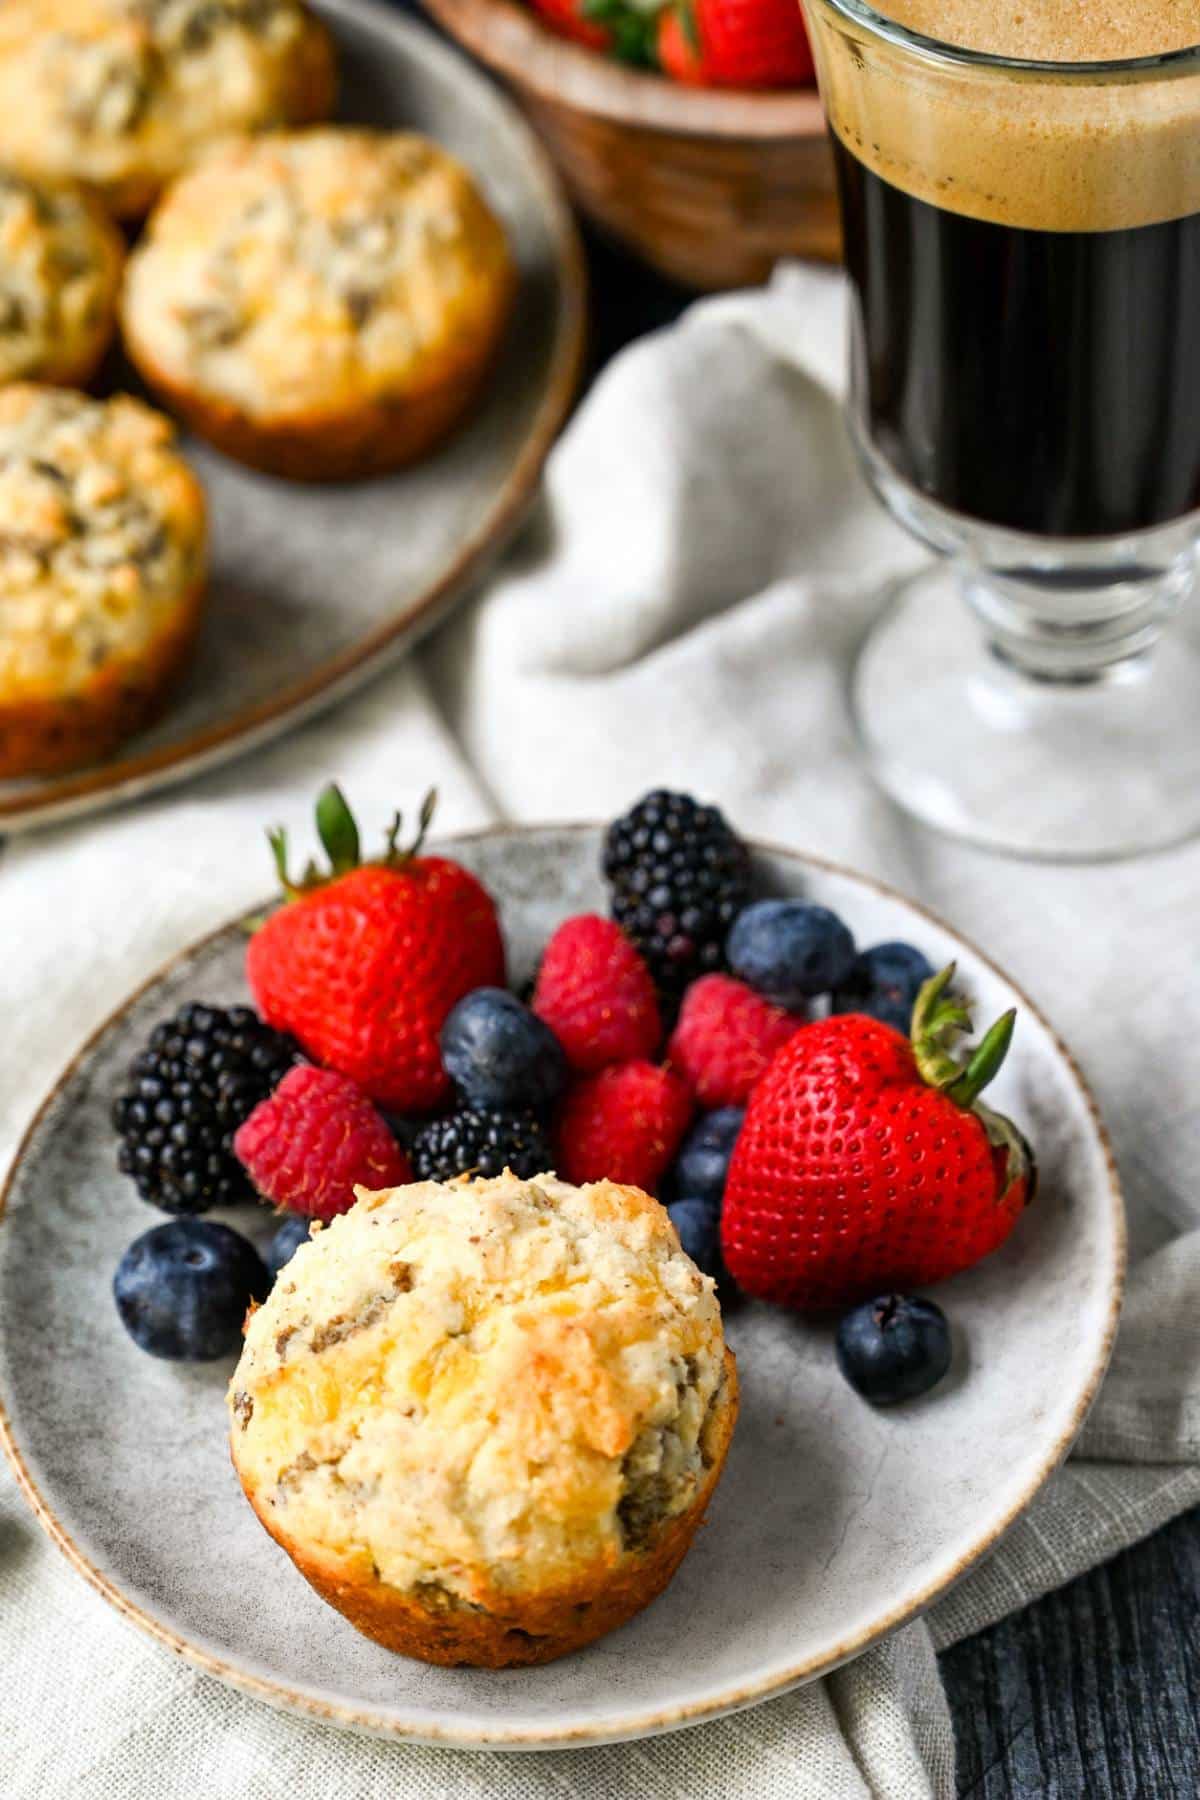 sausage and cheddar muffins on a plate with berries with a plate of muffins and coffee in the background